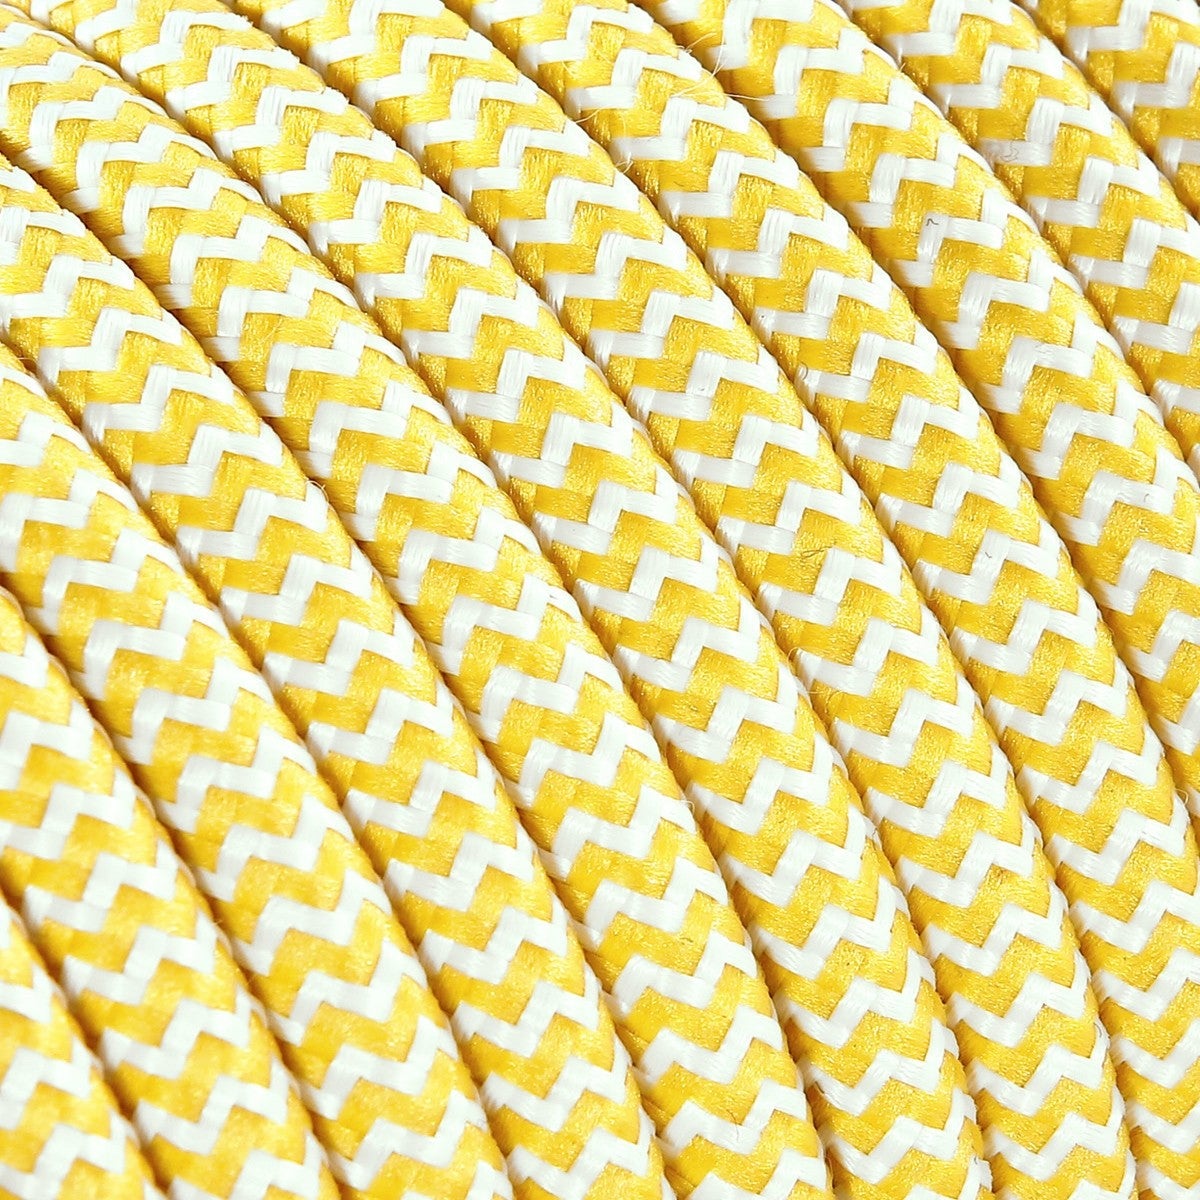 DRESS - Cable Textile Rond 2X0,75 1 mt TO108 BLANC/JAUNE | Leroy Merlin